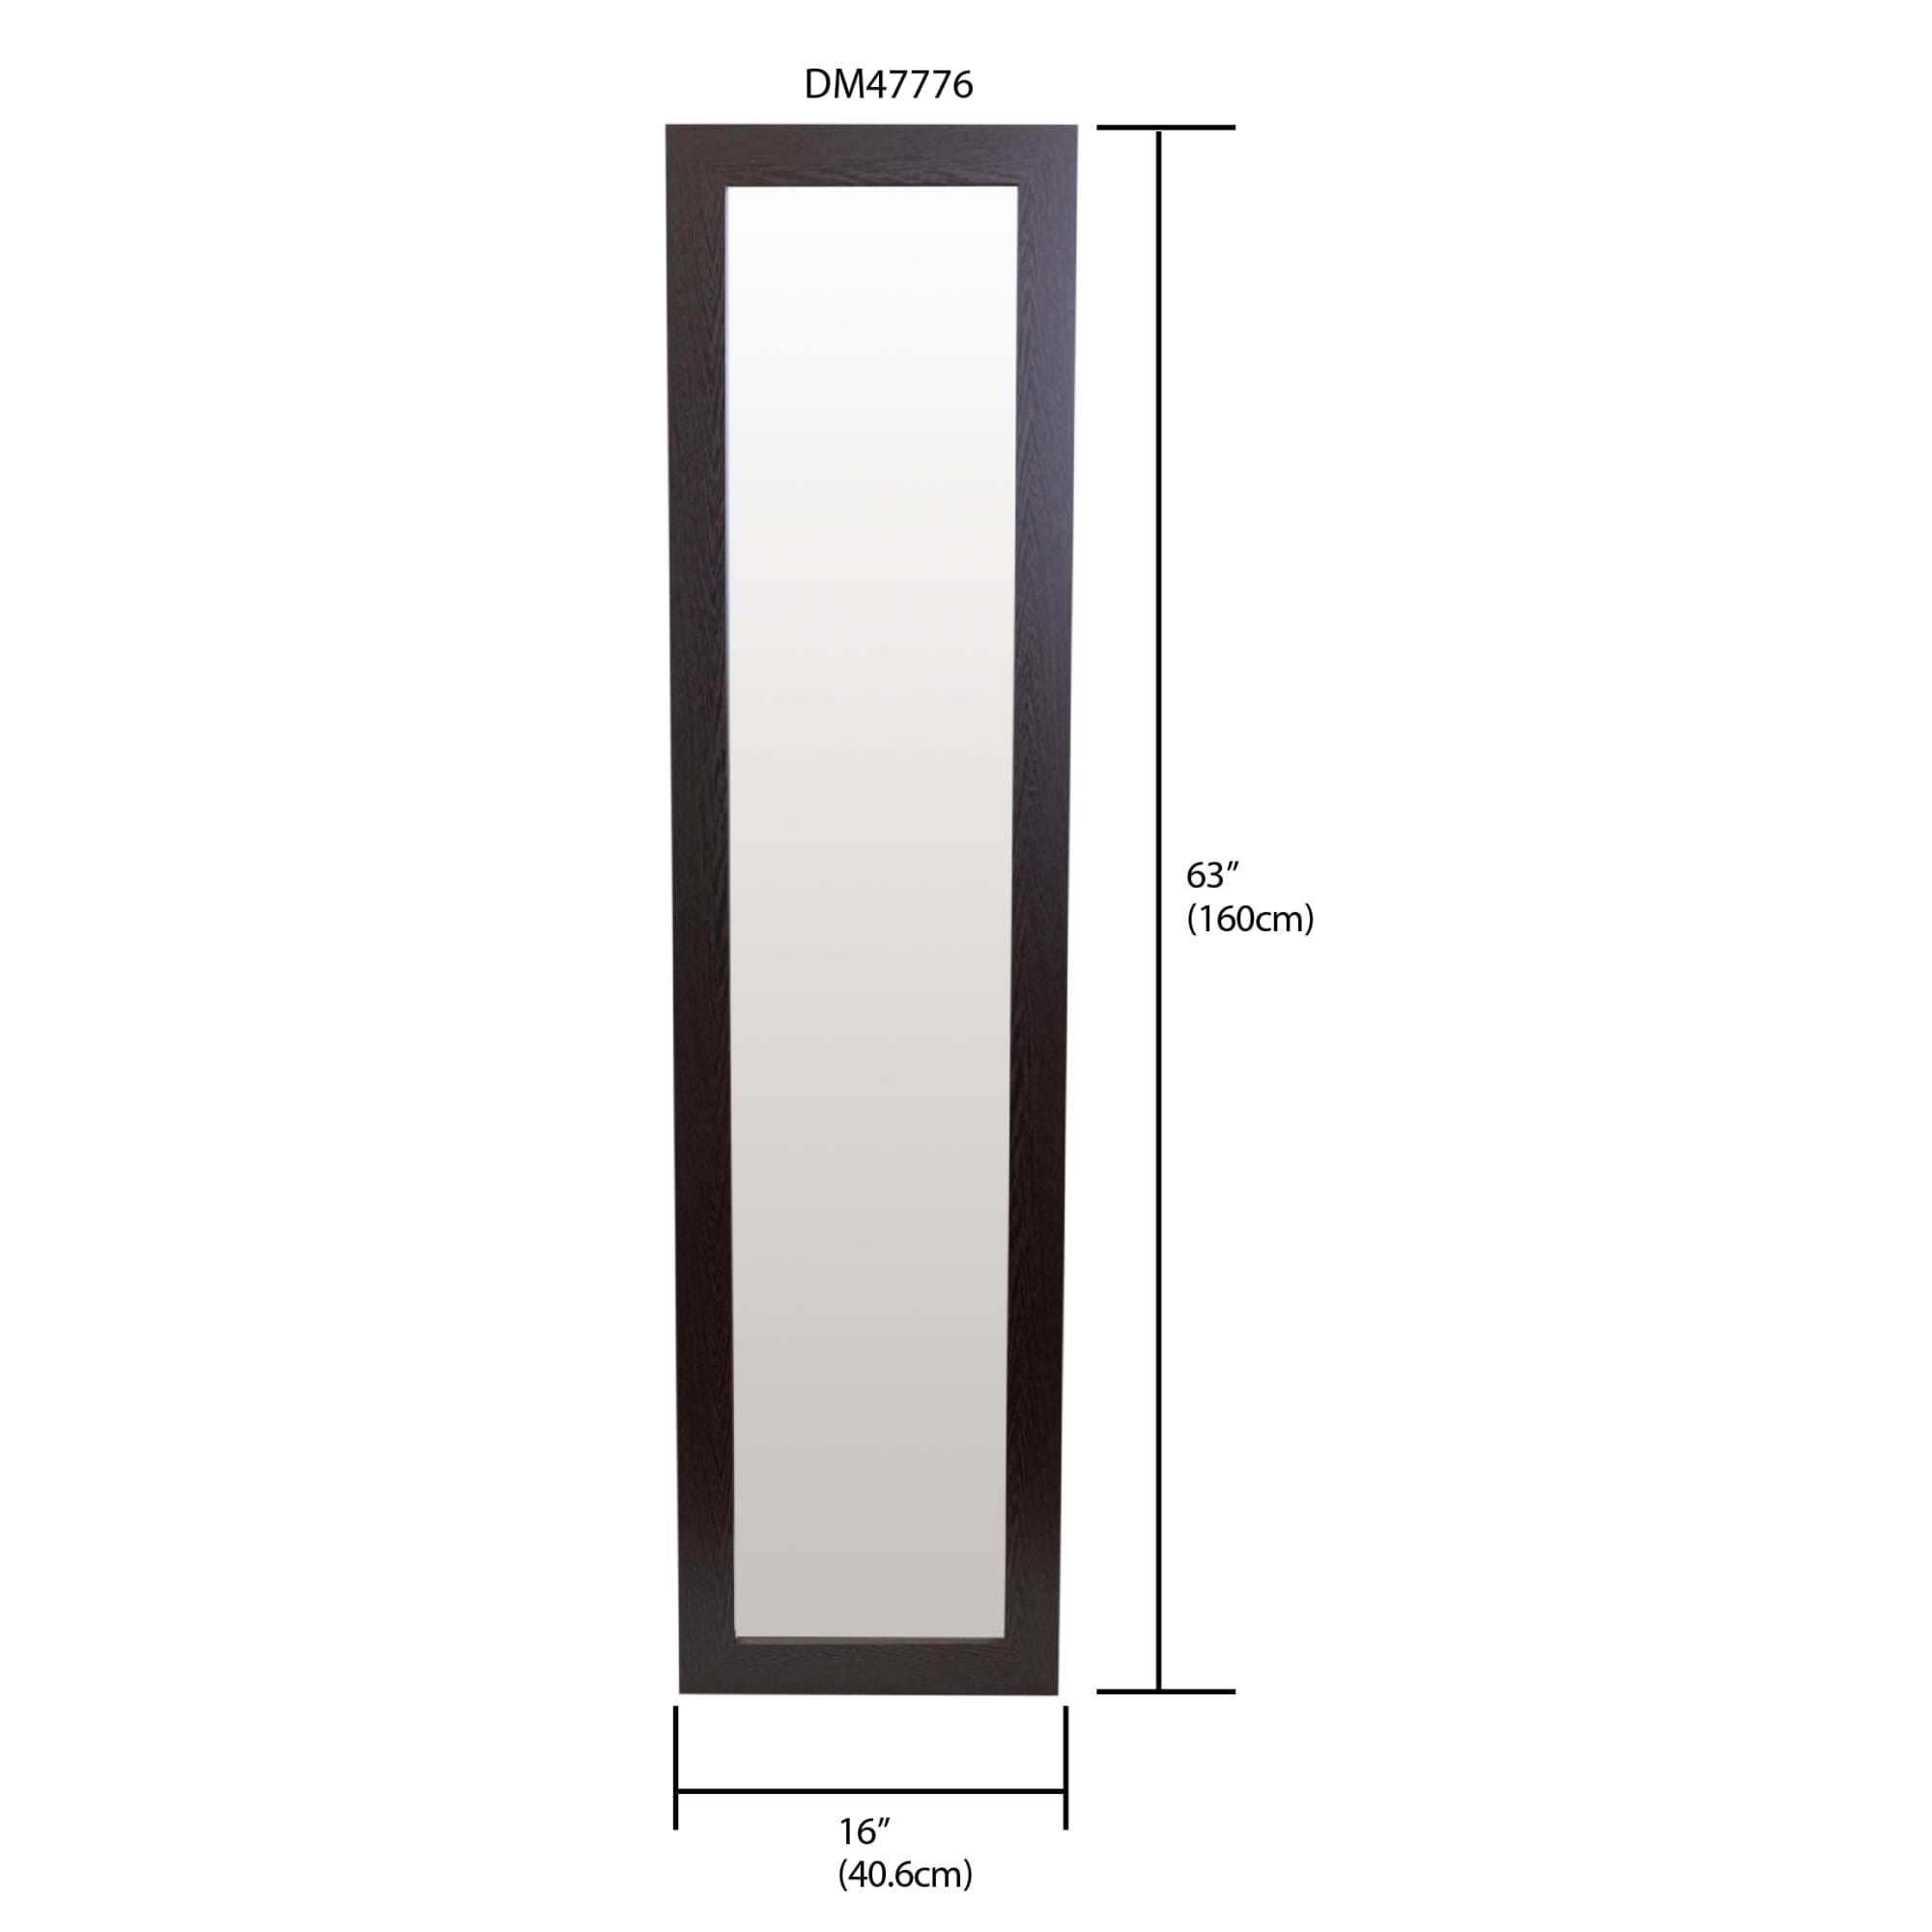 Home Basics Full Length Floor Mirror With Easel Back, Mahogany $30.00 EACH, CASE PACK OF 4